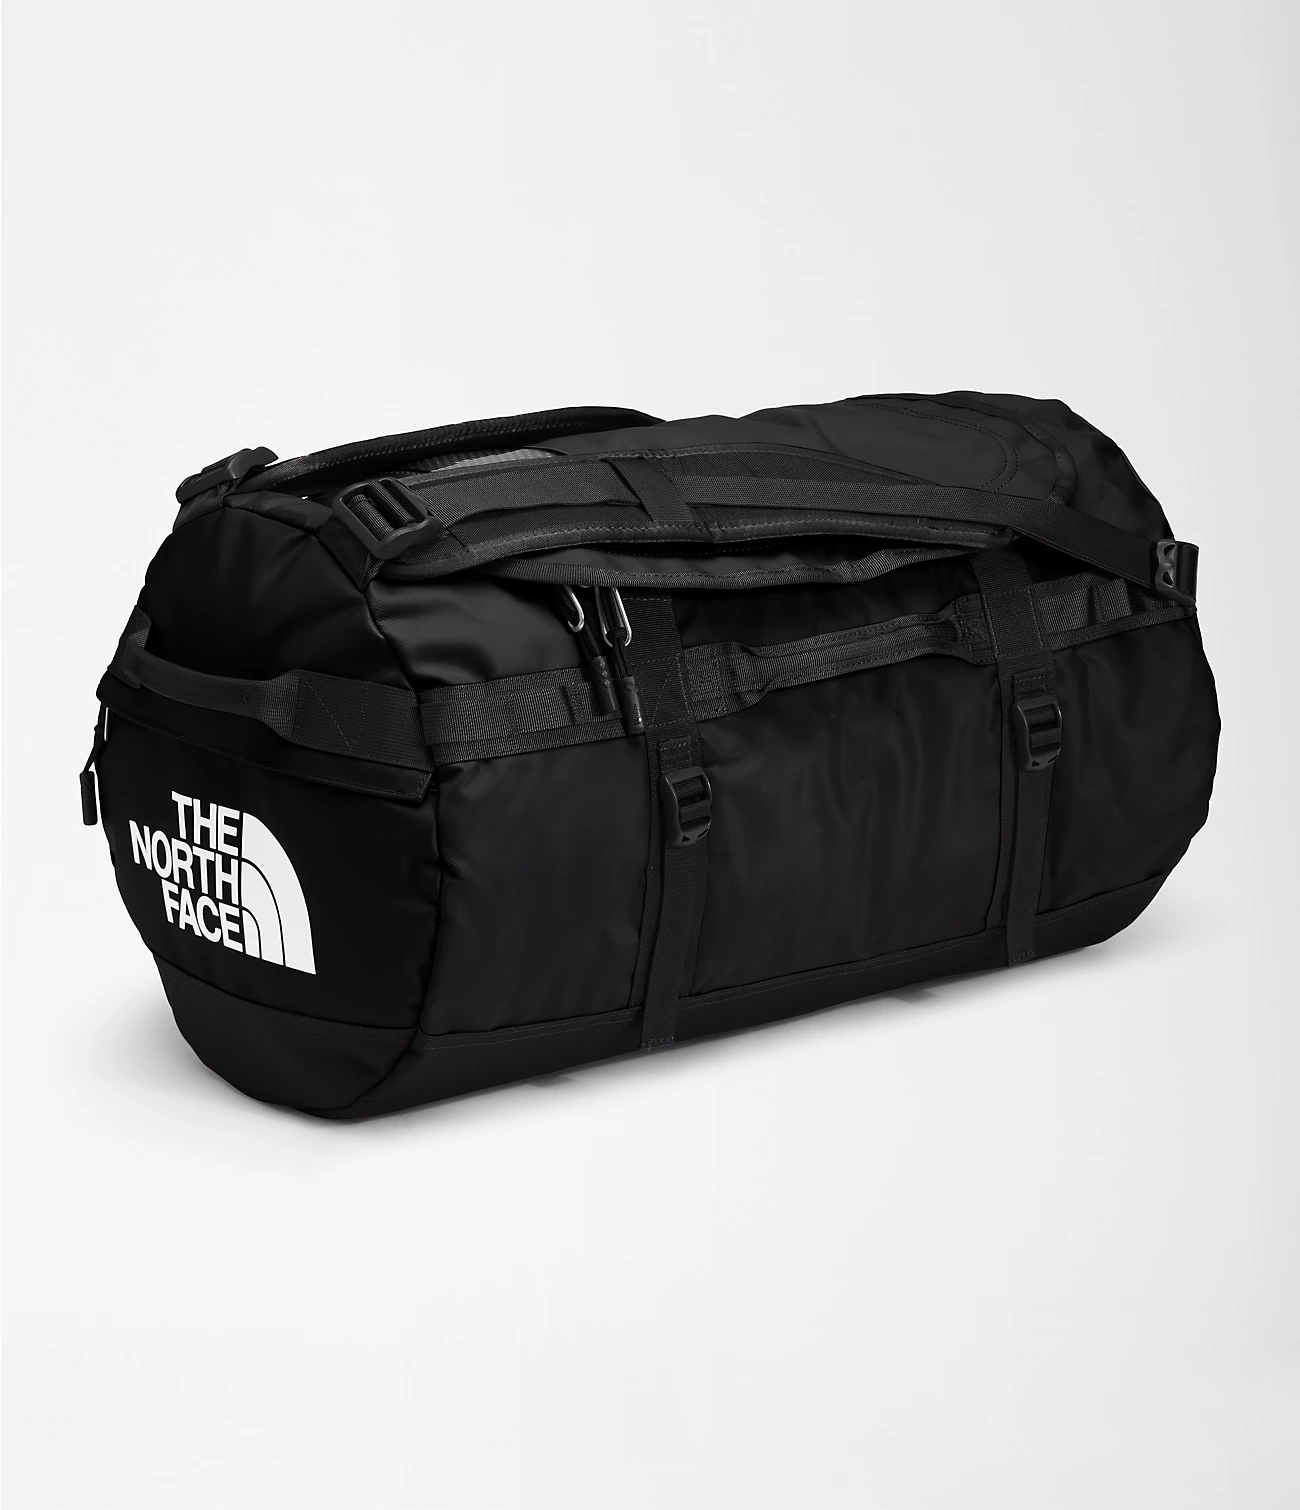 A Black BaseCamp Duffle Bag by The North Face